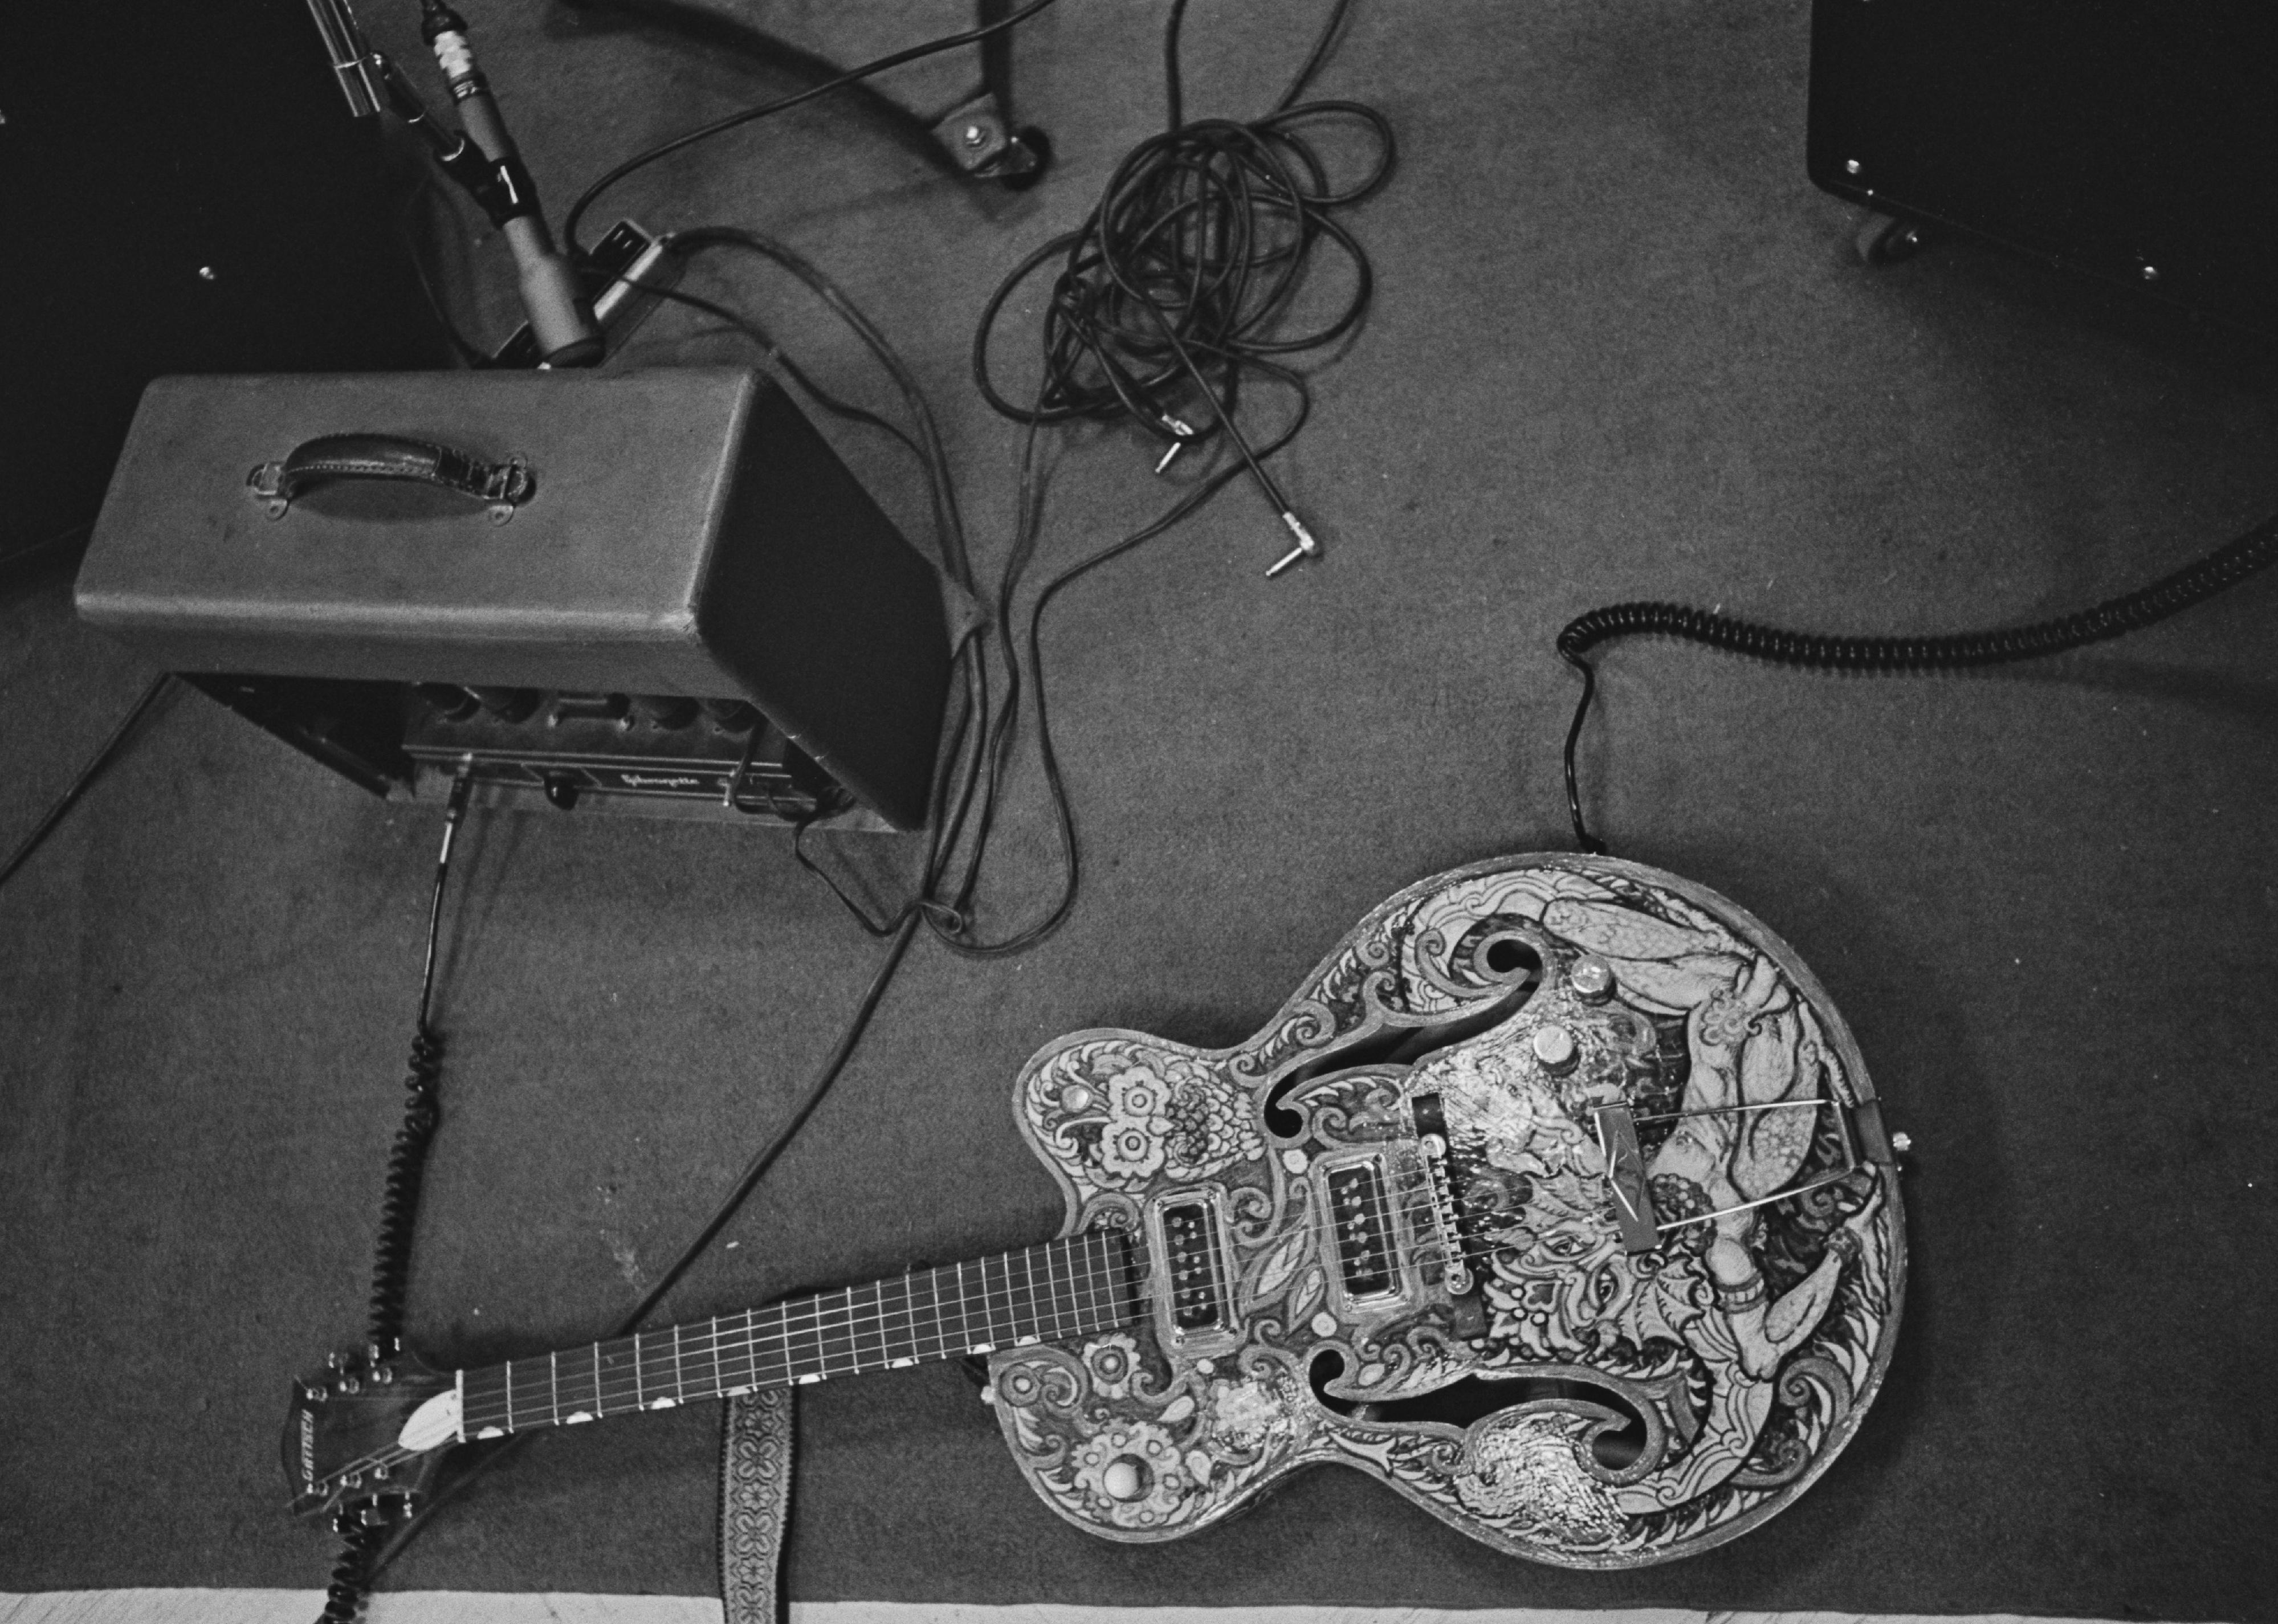 A decorated Gretsch 6120 guitar on the floor of a studio.